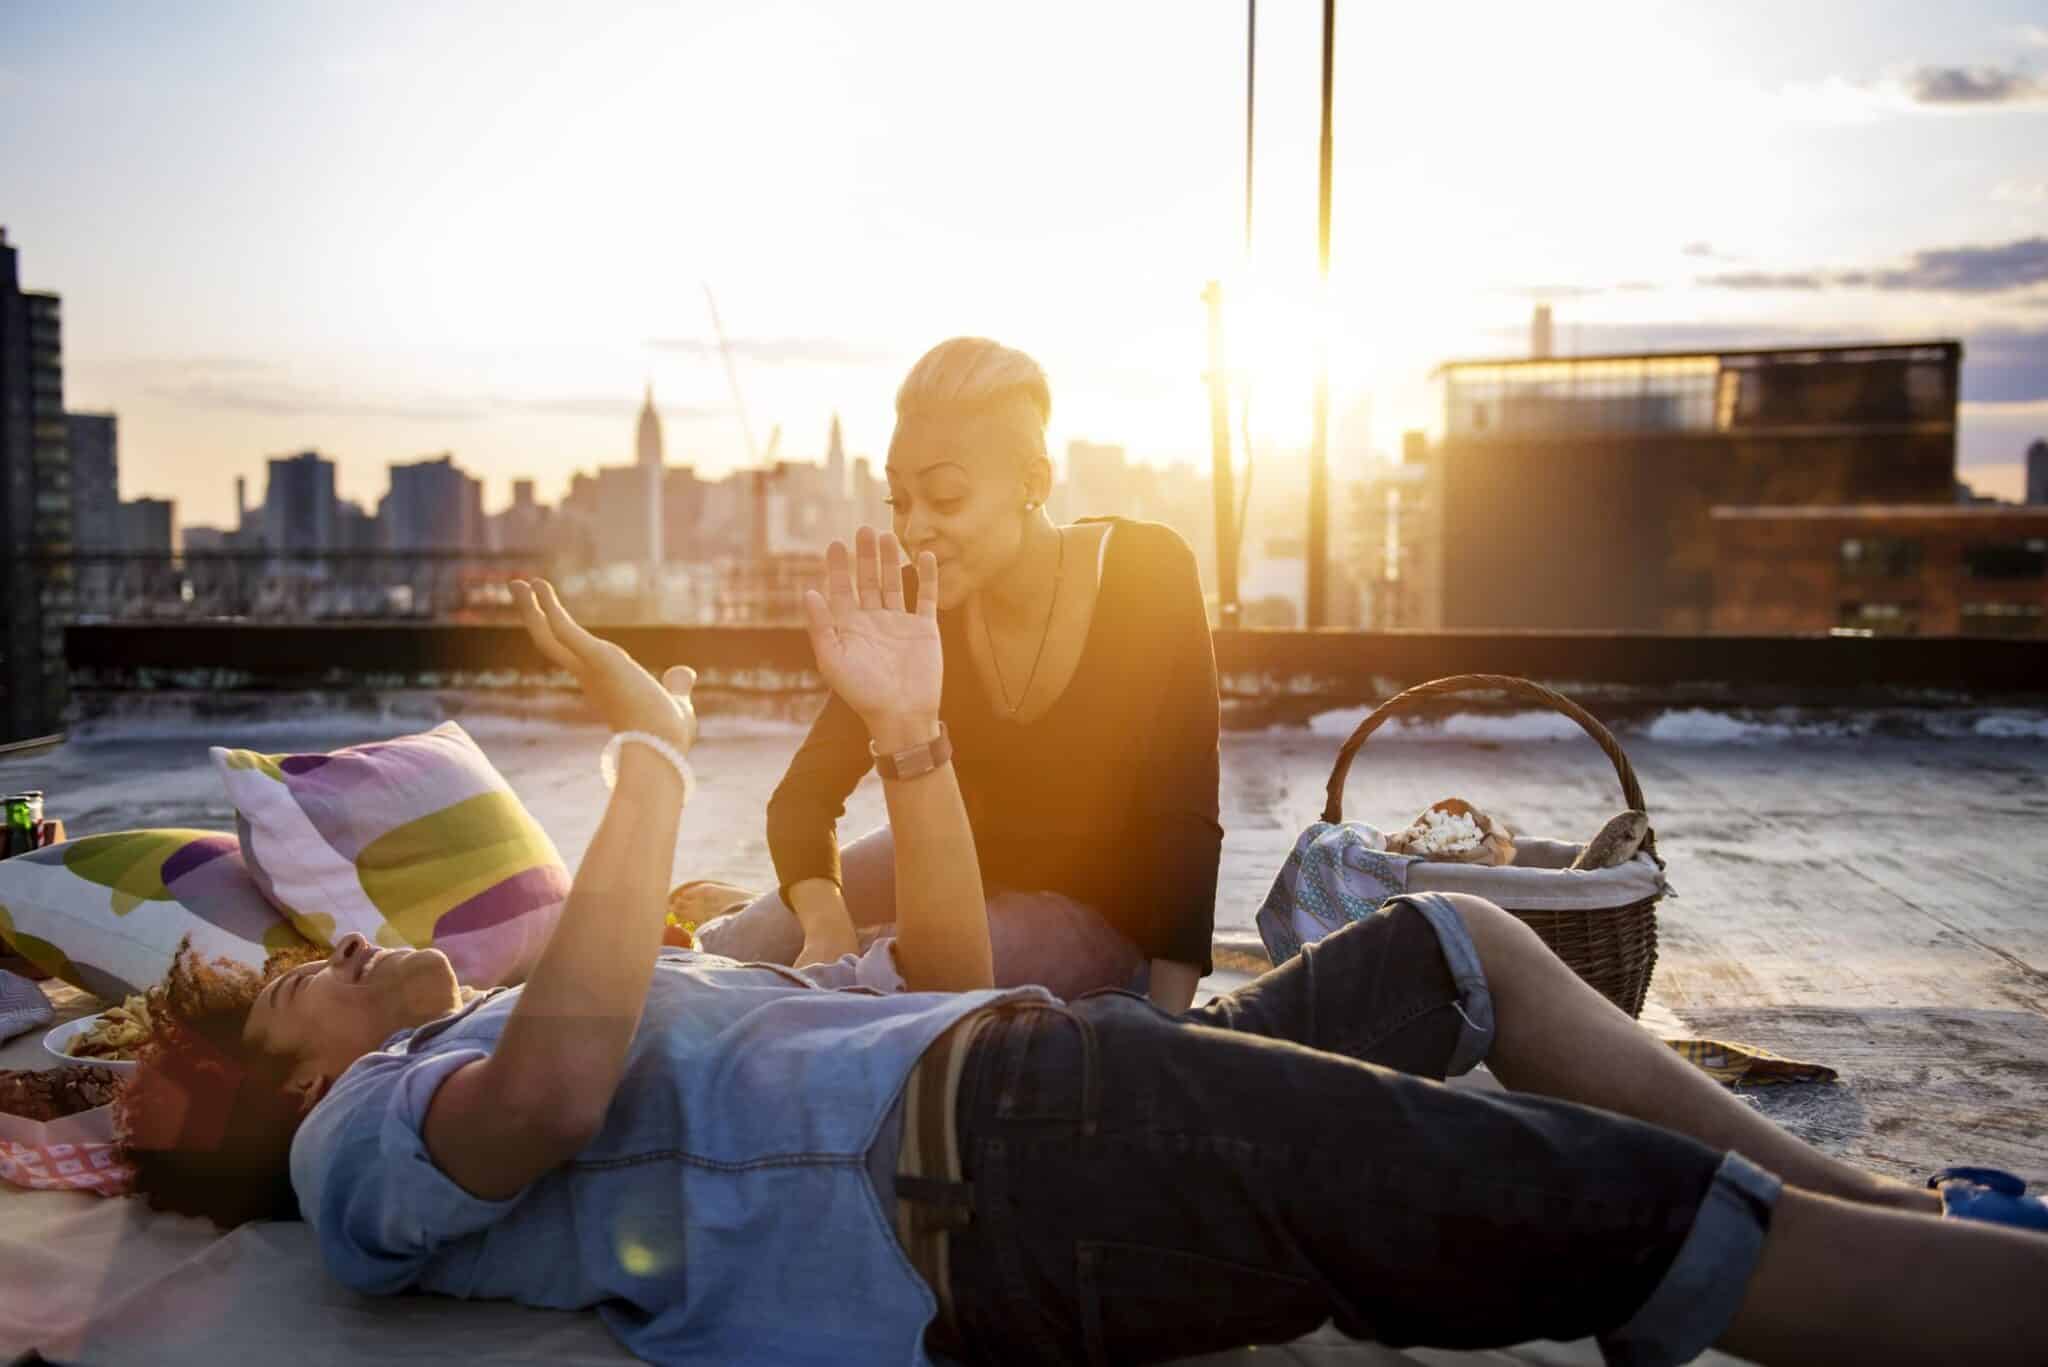 Man lying besides woman sitting on rooftop against sky during sunset